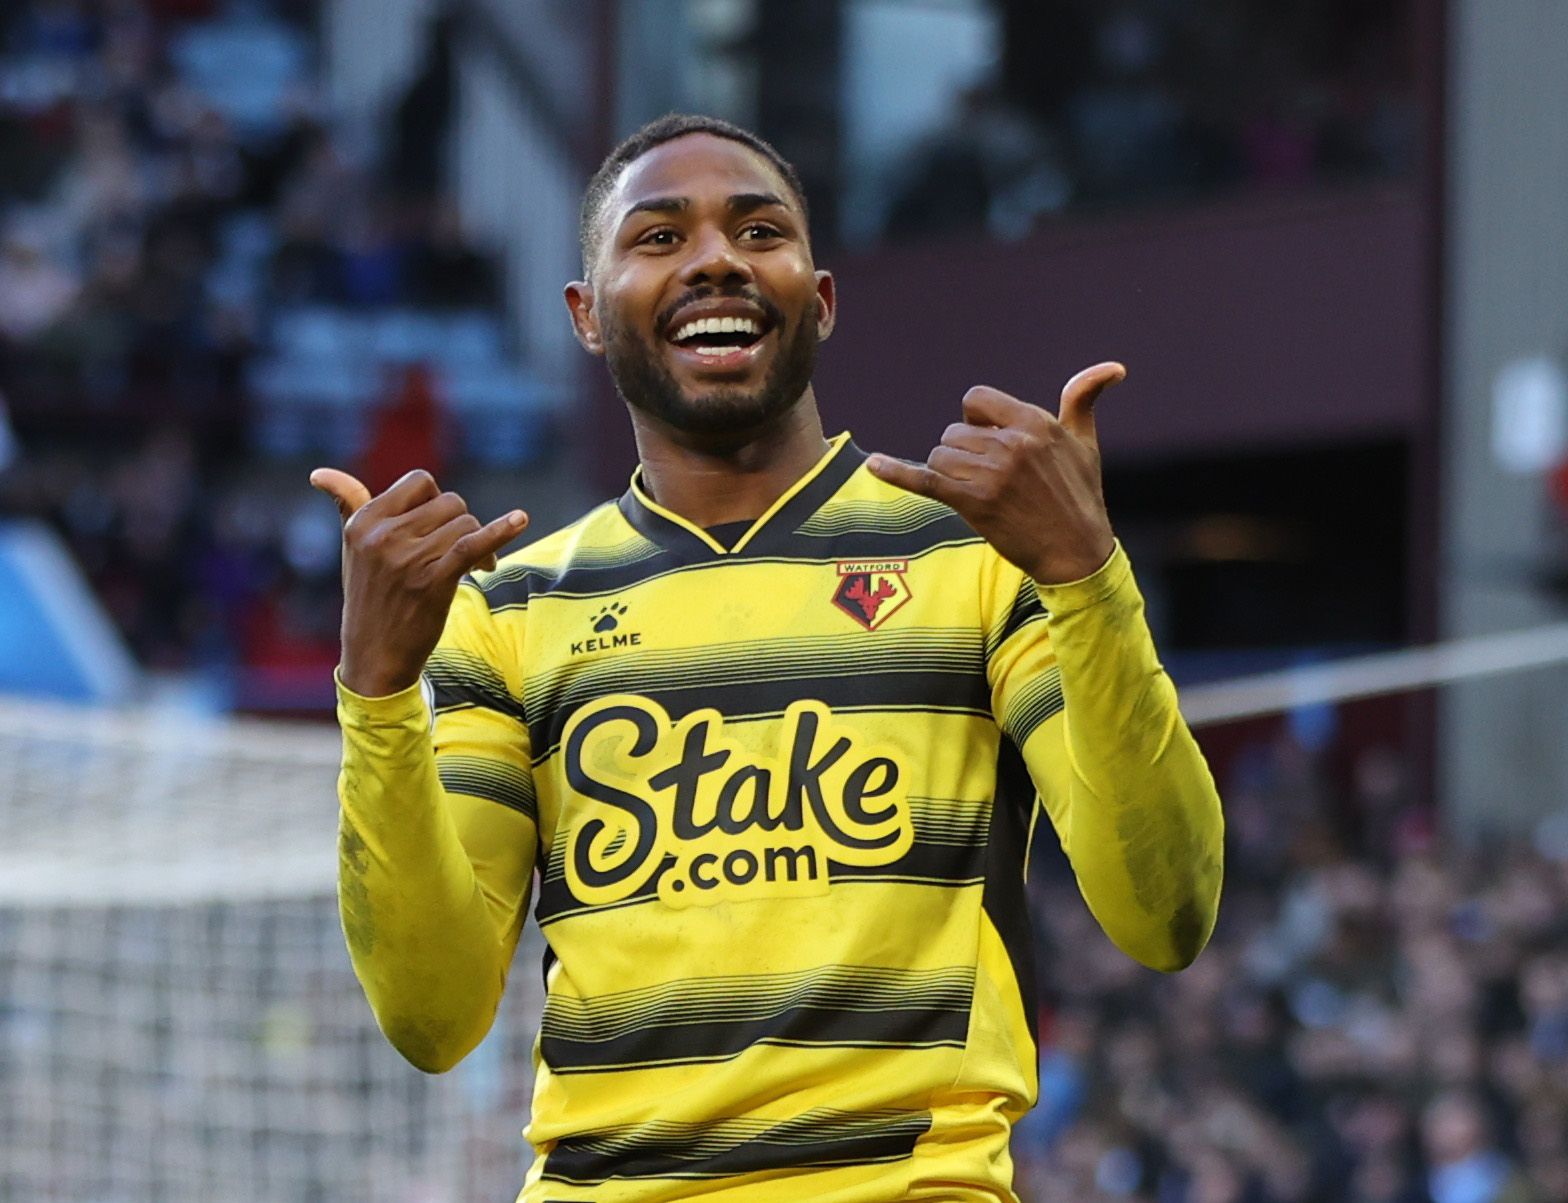 Soccer Football - Premier League - Aston Villa v Watford - Villa Park, Birmingham, Britain - February 19, 2022 Watford's Emmanuel Dennis celebrates scoring their first goal Action Images via Reuters/Molly Darlington EDITORIAL USE ONLY. No use with unauthorized audio, video, data, fixture lists, club/league logos or 'live' services. Online in-match use limited to 75 images, no video emulation. No use in betting, games or single club /league/player publications.  Please contact your account repres